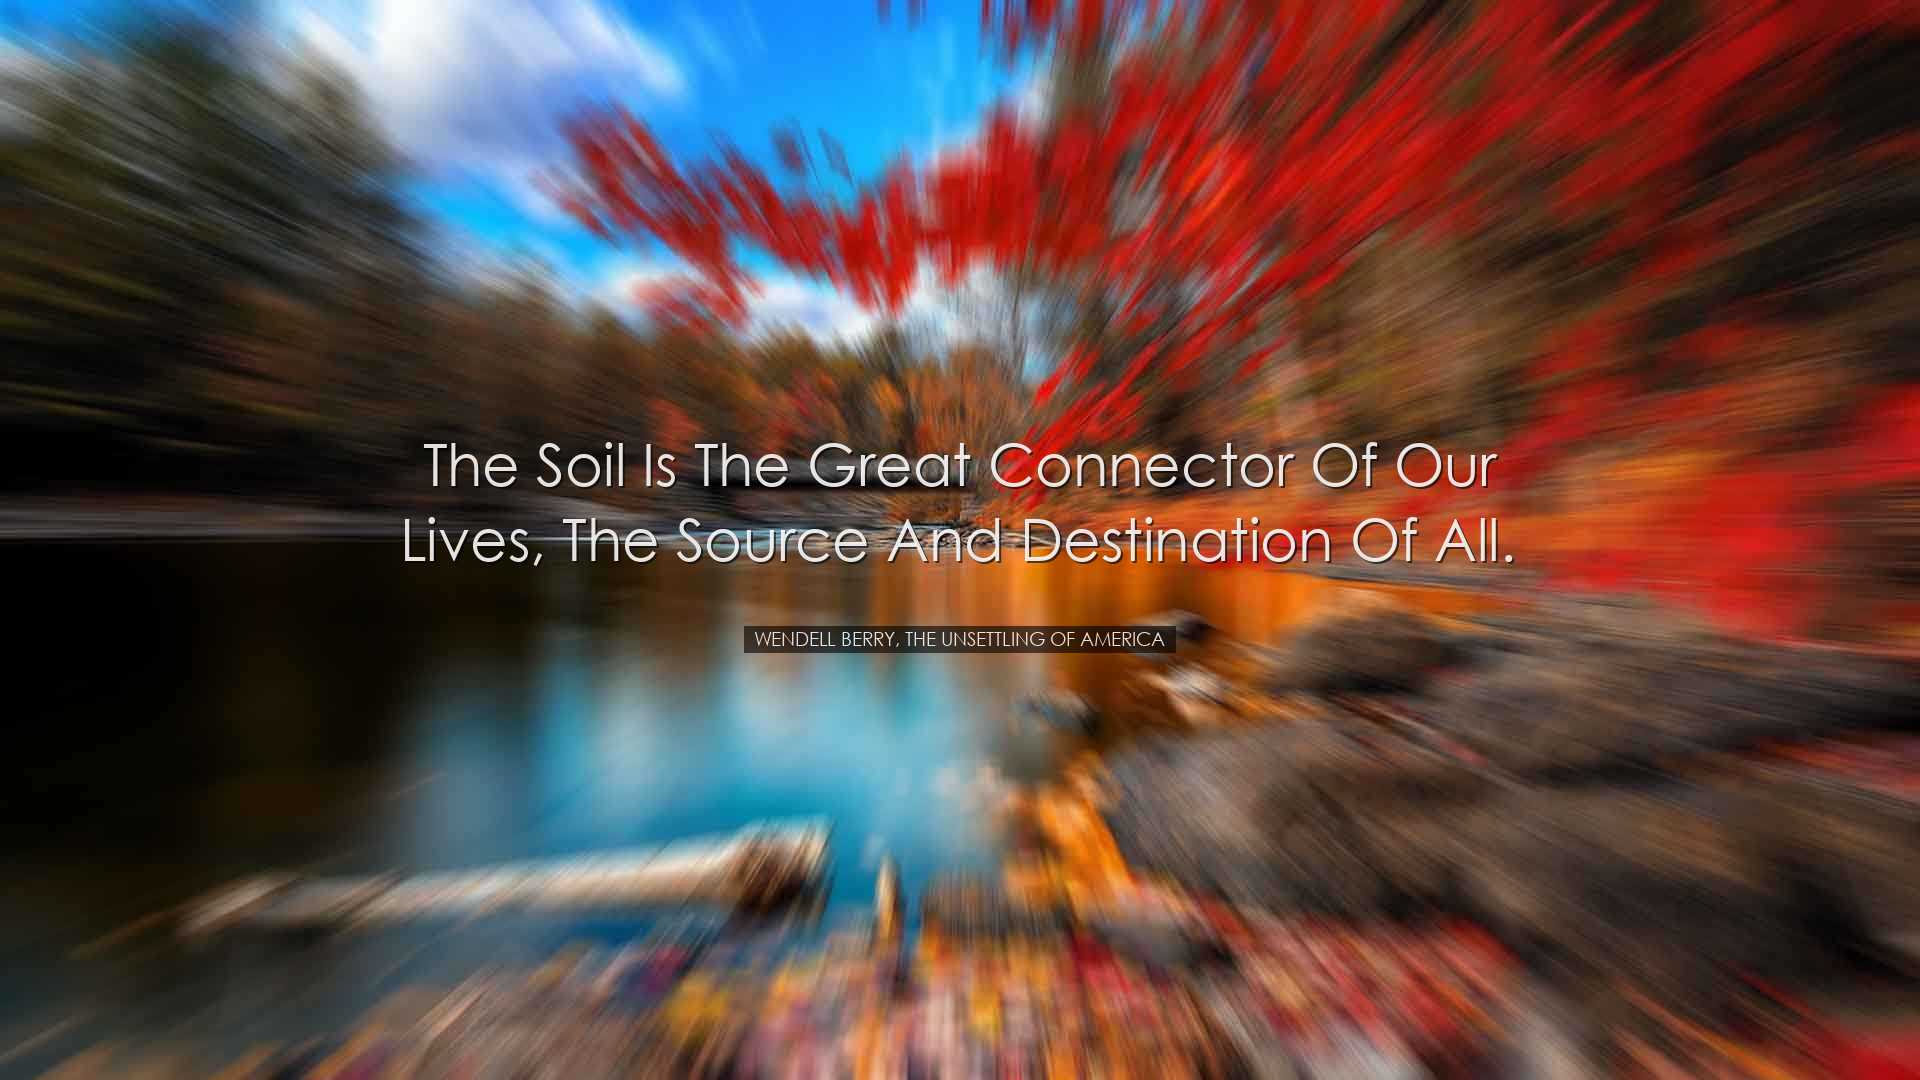 The soil is the great connector of our lives, the source and desti